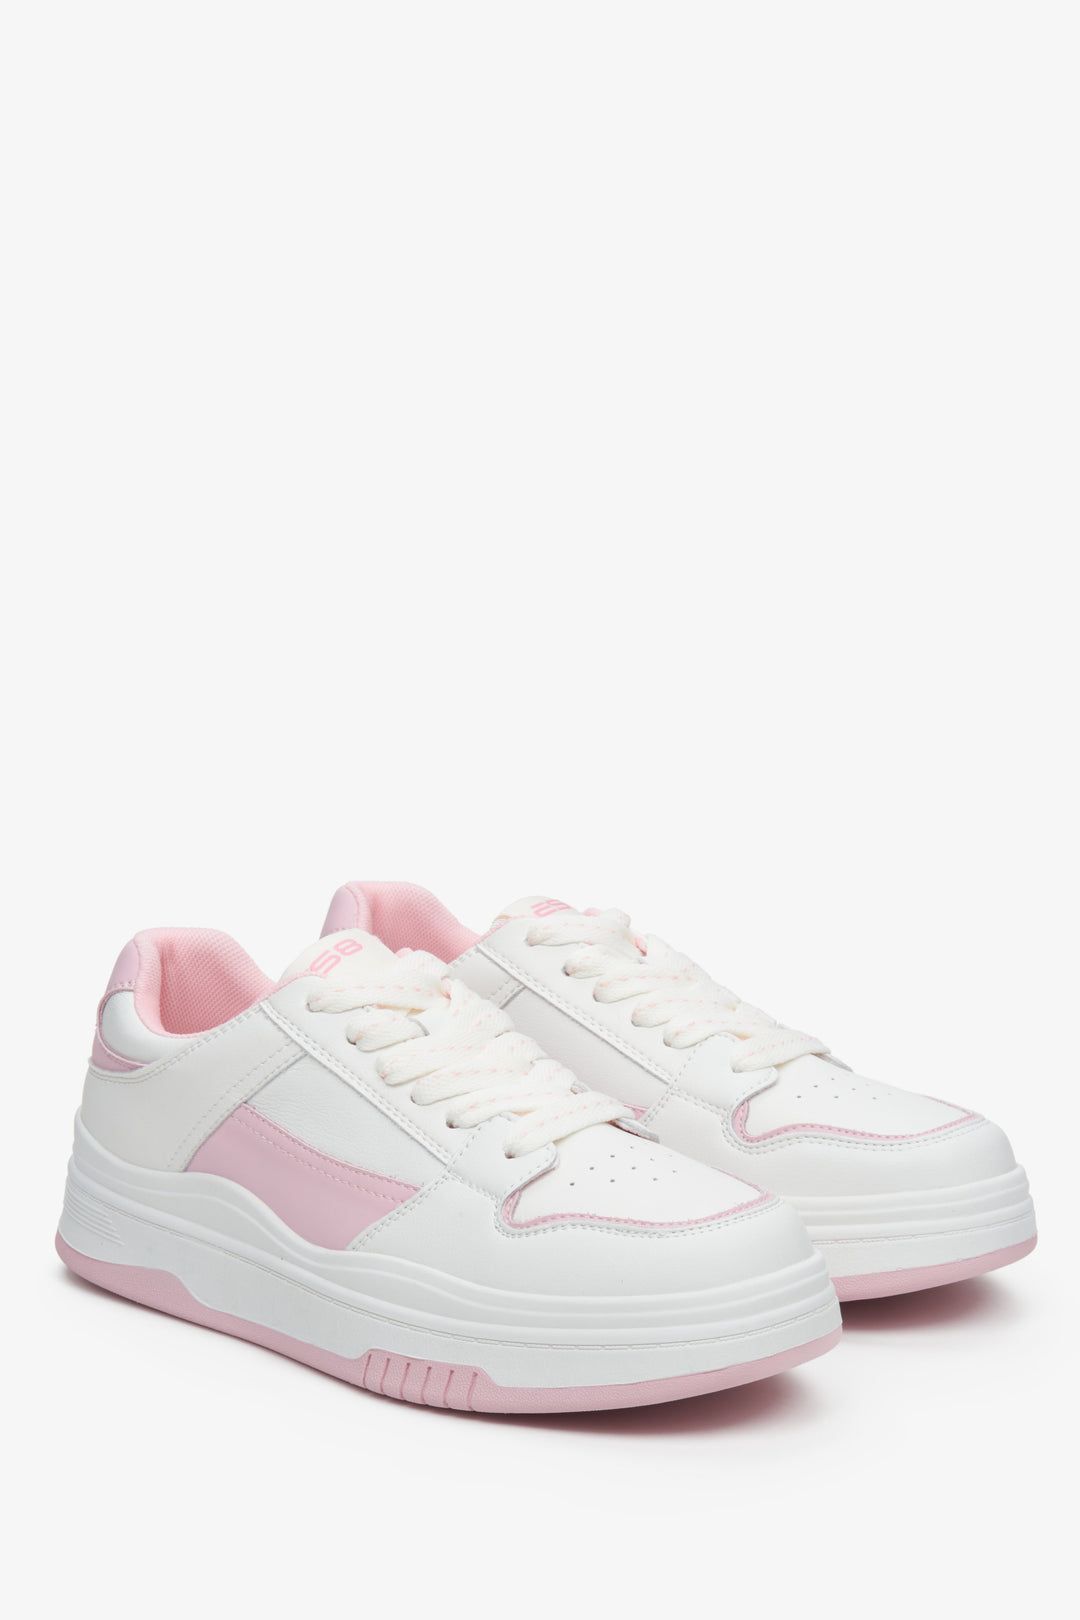 Women's white and pink leather sneakers.